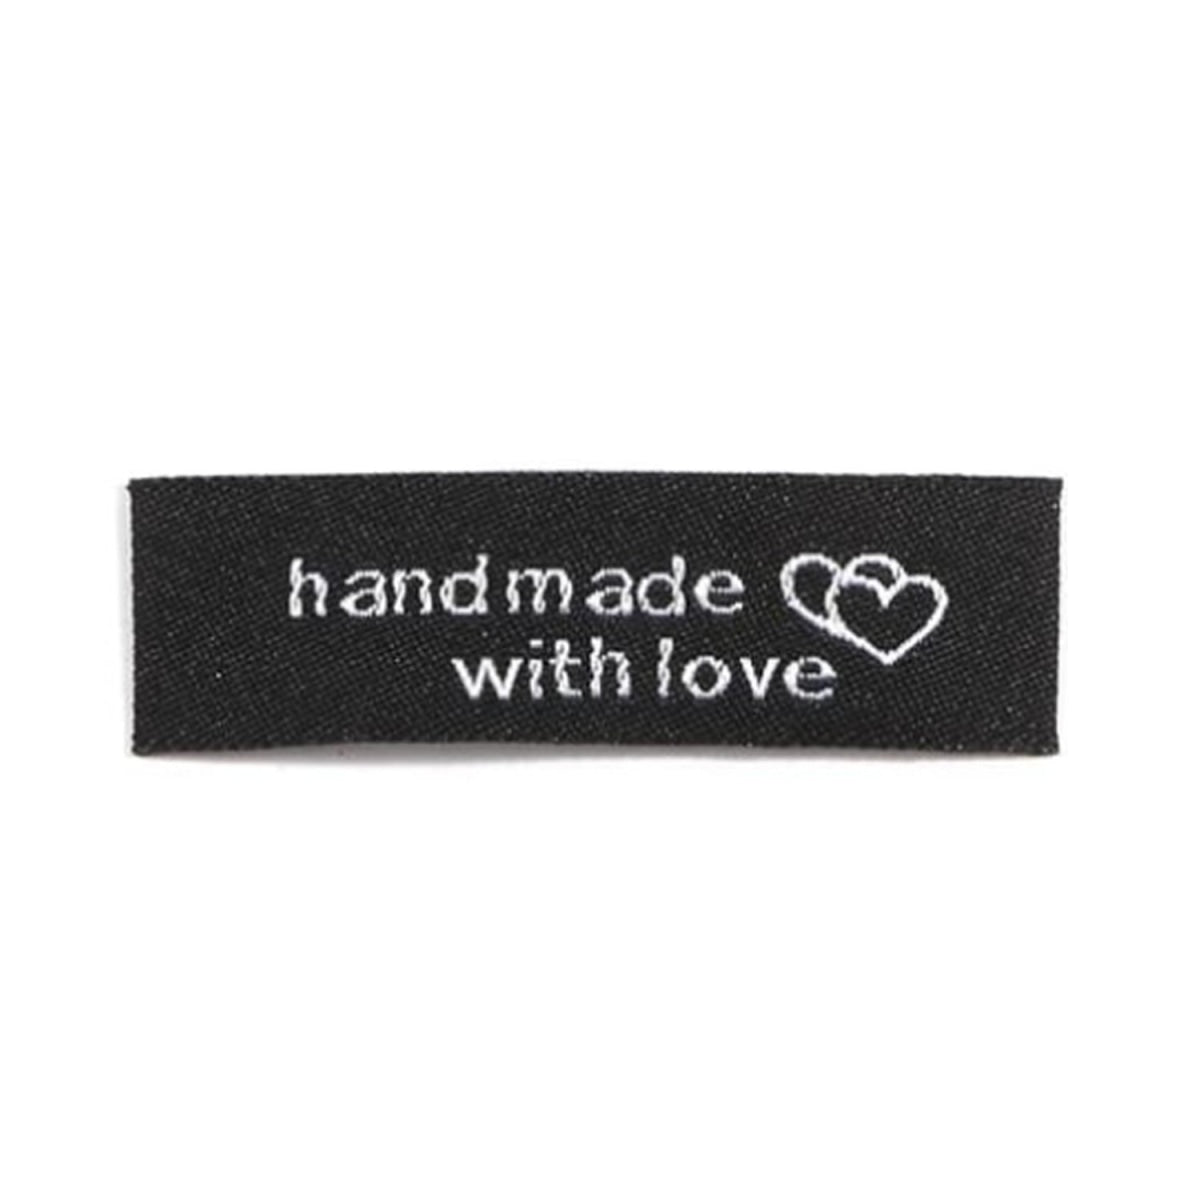 100pcs Sewing Tags Clothing Labels Cloth Fabric "Handmade with Love" Bags DIY - Black - Asia Sell